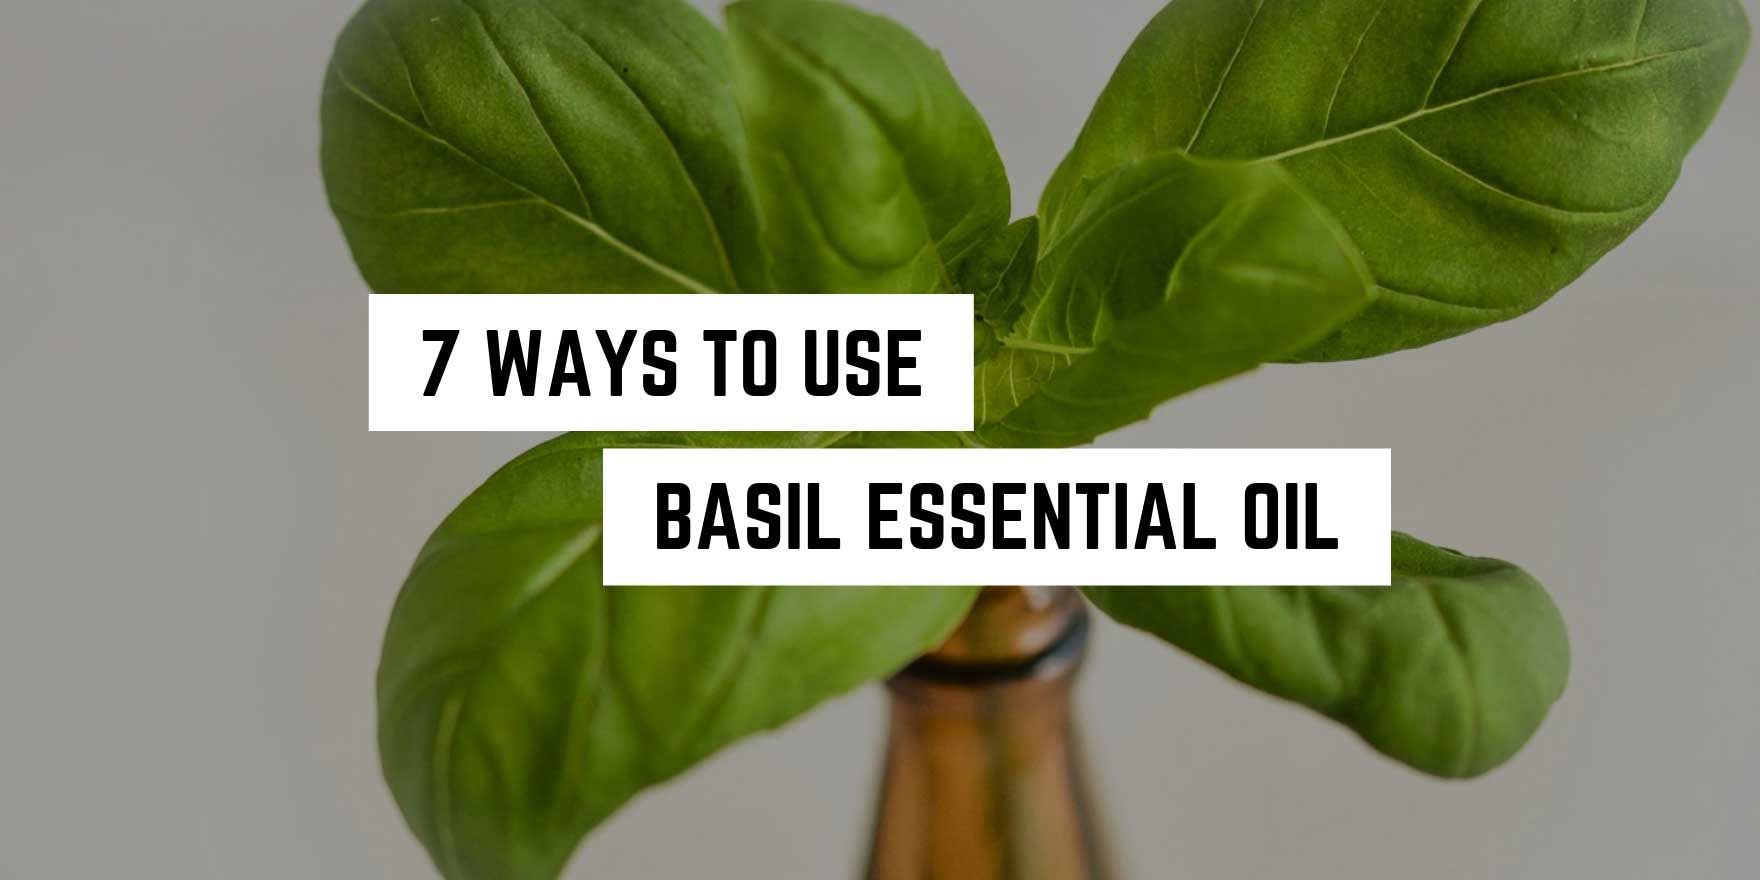 7 Ways to Use Basil Essential Oil